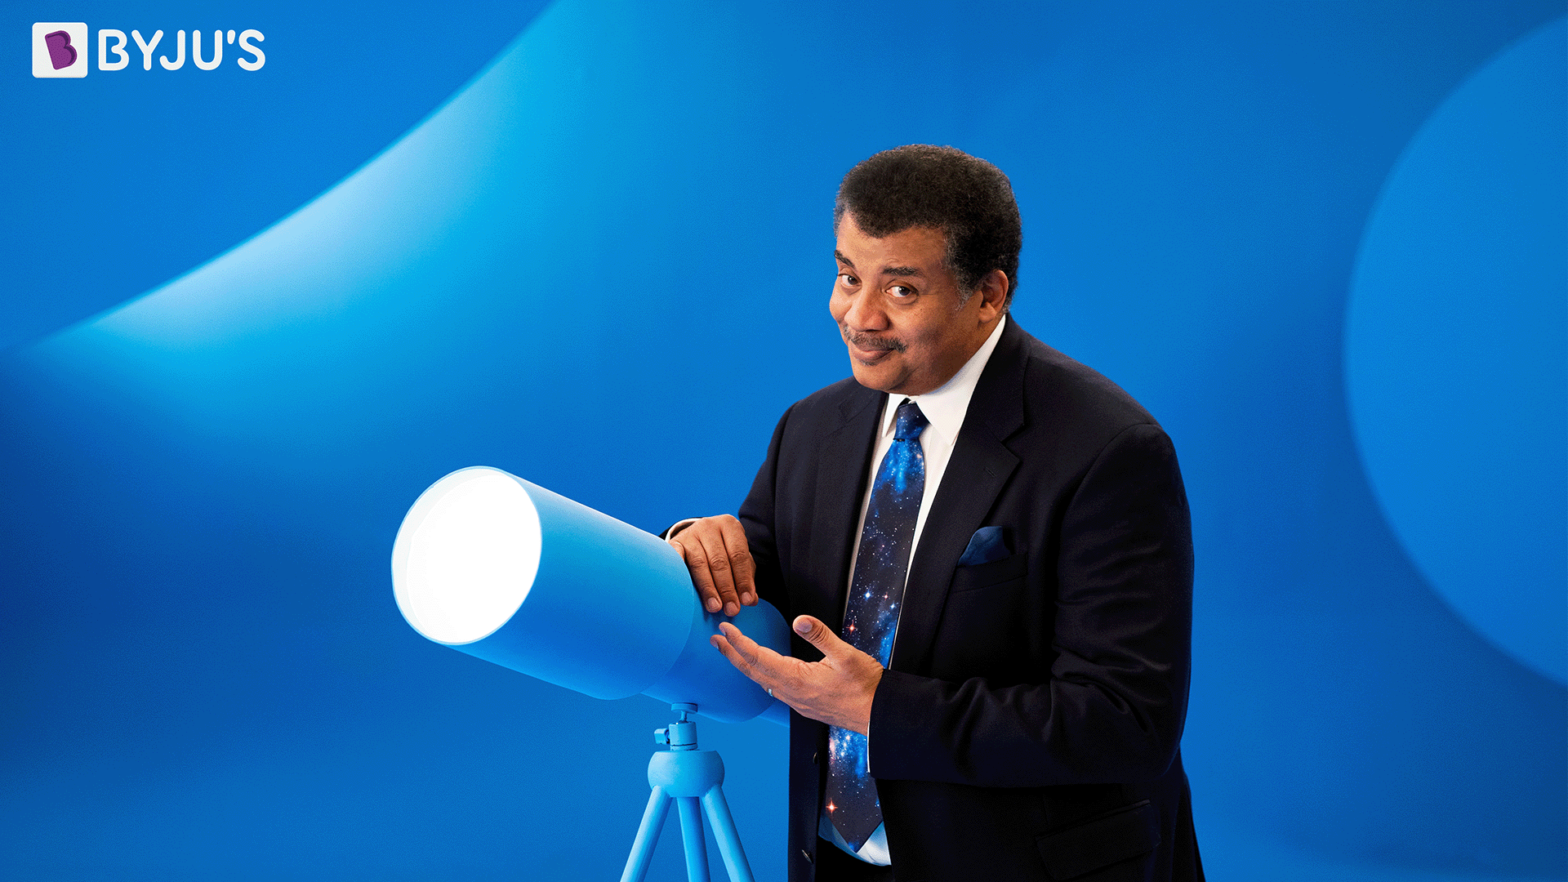 Education Technology Platform BYJU’S Joins Neil deGrasse Tyson To Bring The Wonders Of Space And Computer Coding Into Your Home